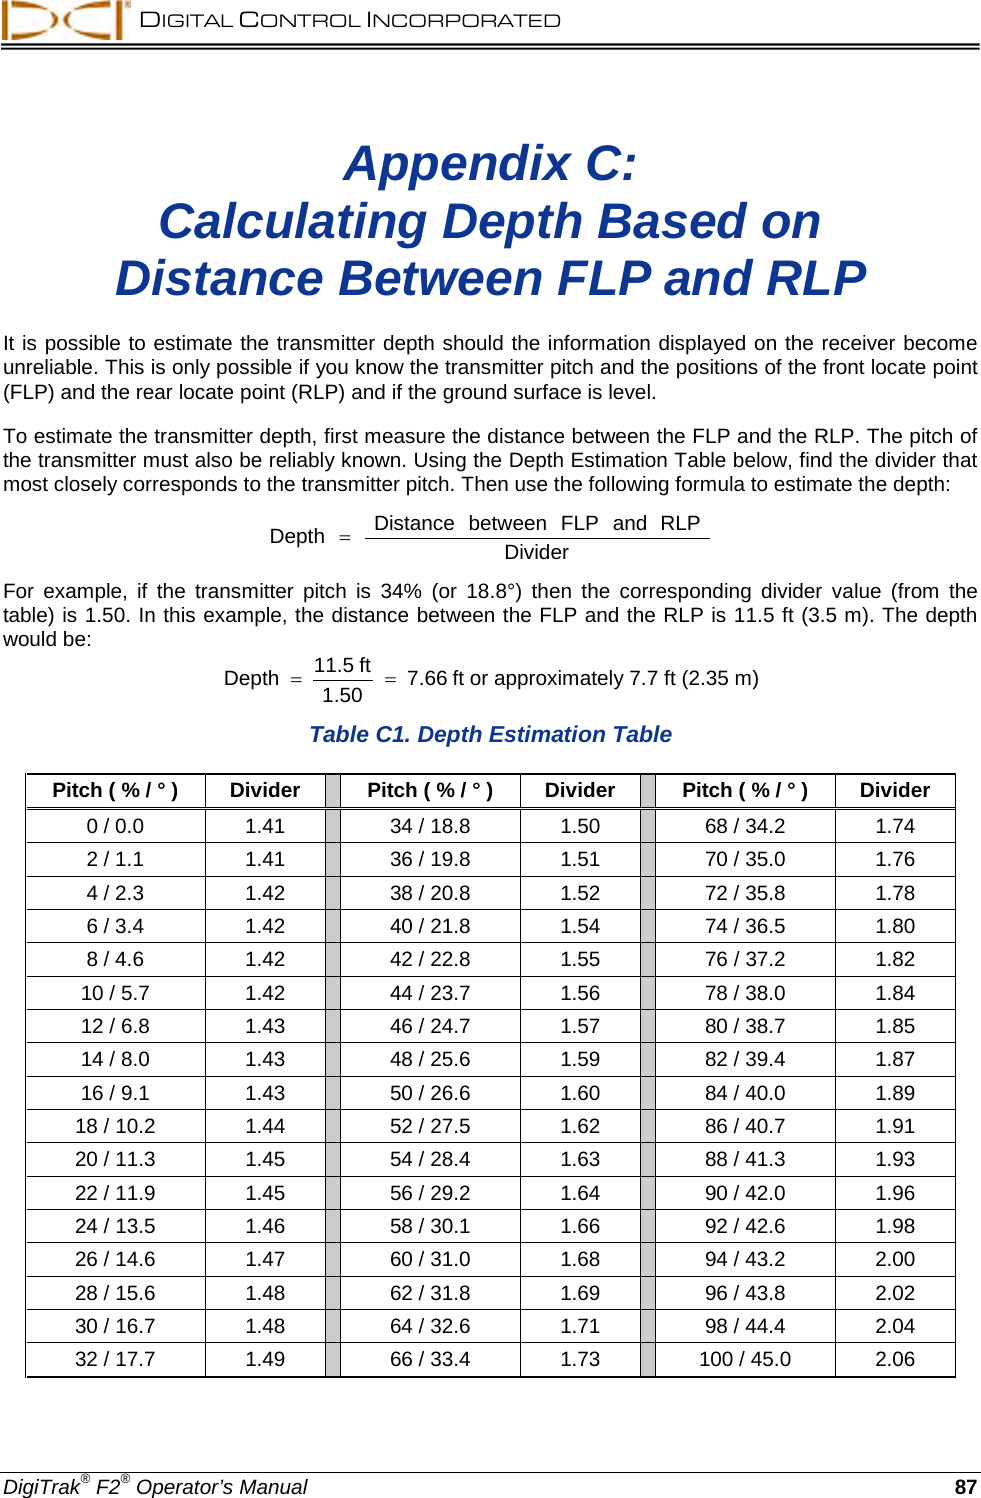  DIGITAL CONTROL INCORPORATED  DigiTrak® F2® Operator’s Manual 87 Appendix C: Calculating Depth Based on Distance Between FLP and RLP  It is possible to estimate the transmitter depth should the information displayed on the receiver become unreliable. This is only possible if you know the transmitter pitch and the positions of the front locate point (FLP) and the rear locate point (RLP) and if the ground surface is level.  To estimate the transmitter depth, first measure the distance between the FLP and the RLP. The pitch of the transmitter must also be reliably known. Using the Depth Estimation Table below, find the divider that most closely corresponds to the transmitter pitch. Then use the following formula to estimate the depth: DividerRLPandFLPbetweenDistanceDepth = For example, if the transmitter pitch is 34% (or 18.8°) then the corresponding divider value (from the table) is 1.50. In this example, the distance between the FLP and the RLP is 11.5 ft (3.5 m). The depth would be: 7.661.50ft 11.5Depth ==ft or approximately 7.7 ft (2.35 m)  Table C1. Depth Estimation Table Pitch ( % / ° ) Divider    Pitch ( % / ° ) Divider    Pitch ( % / ° ) Divider 0 / 0.0 1.41    34 / 18.8 1.50    68 / 34.2 1.74 2 / 1.1 1.41    36 / 19.8 1.51    70 / 35.0 1.76 4 / 2.3 1.42    38 / 20.8 1.52    72 / 35.8 1.78 6 / 3.4 1.42    40 / 21.8 1.54    74 / 36.5 1.80 8 / 4.6 1.42    42 / 22.8 1.55    76 / 37.2 1.82 10 / 5.7 1.42    44 / 23.7 1.56    78 / 38.0 1.84 12 / 6.8 1.43    46 / 24.7 1.57    80 / 38.7 1.85 14 / 8.0 1.43    48 / 25.6 1.59    82 / 39.4 1.87 16 / 9.1 1.43    50 / 26.6 1.60    84 / 40.0 1.89 18 / 10.2 1.44    52 / 27.5 1.62    86 / 40.7 1.91 20 / 11.3 1.45    54 / 28.4 1.63    88 / 41.3 1.93 22 / 11.9 1.45    56 / 29.2 1.64    90 / 42.0 1.96 24 / 13.5 1.46    58 / 30.1 1.66    92 / 42.6 1.98 26 / 14.6 1.47    60 / 31.0 1.68    94 / 43.2 2.00 28 / 15.6 1.48    62 / 31.8 1.69    96 / 43.8 2.02 30 / 16.7 1.48    64 / 32.6 1.71    98 / 44.4 2.04 32 / 17.7 1.49    66 / 33.4 1.73    100 / 45.0 2.06  